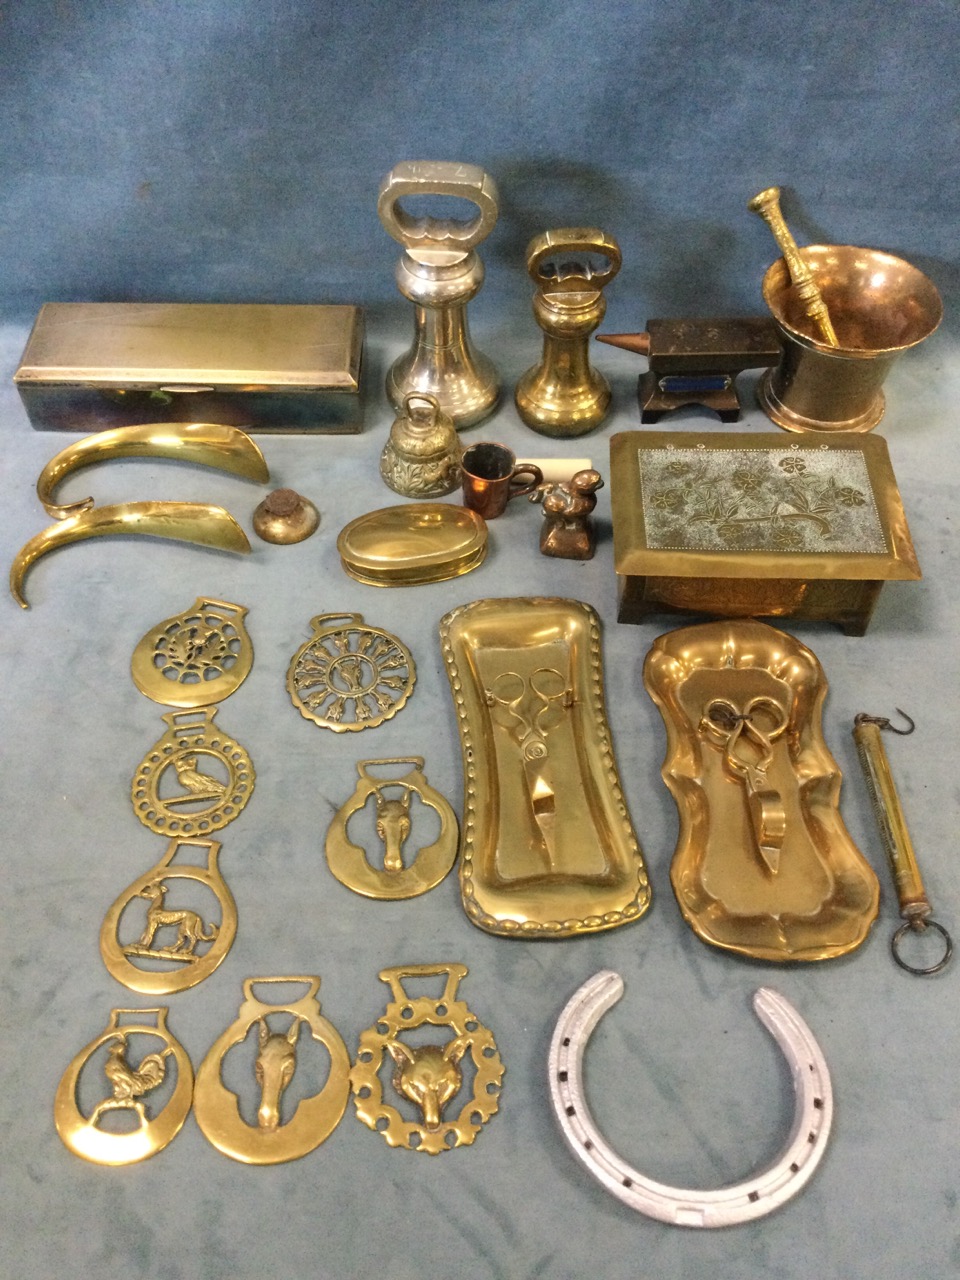 Miscellaneous brass - cigarette boxes, candle snuffers and trays, an anvil, pestle and mortar,